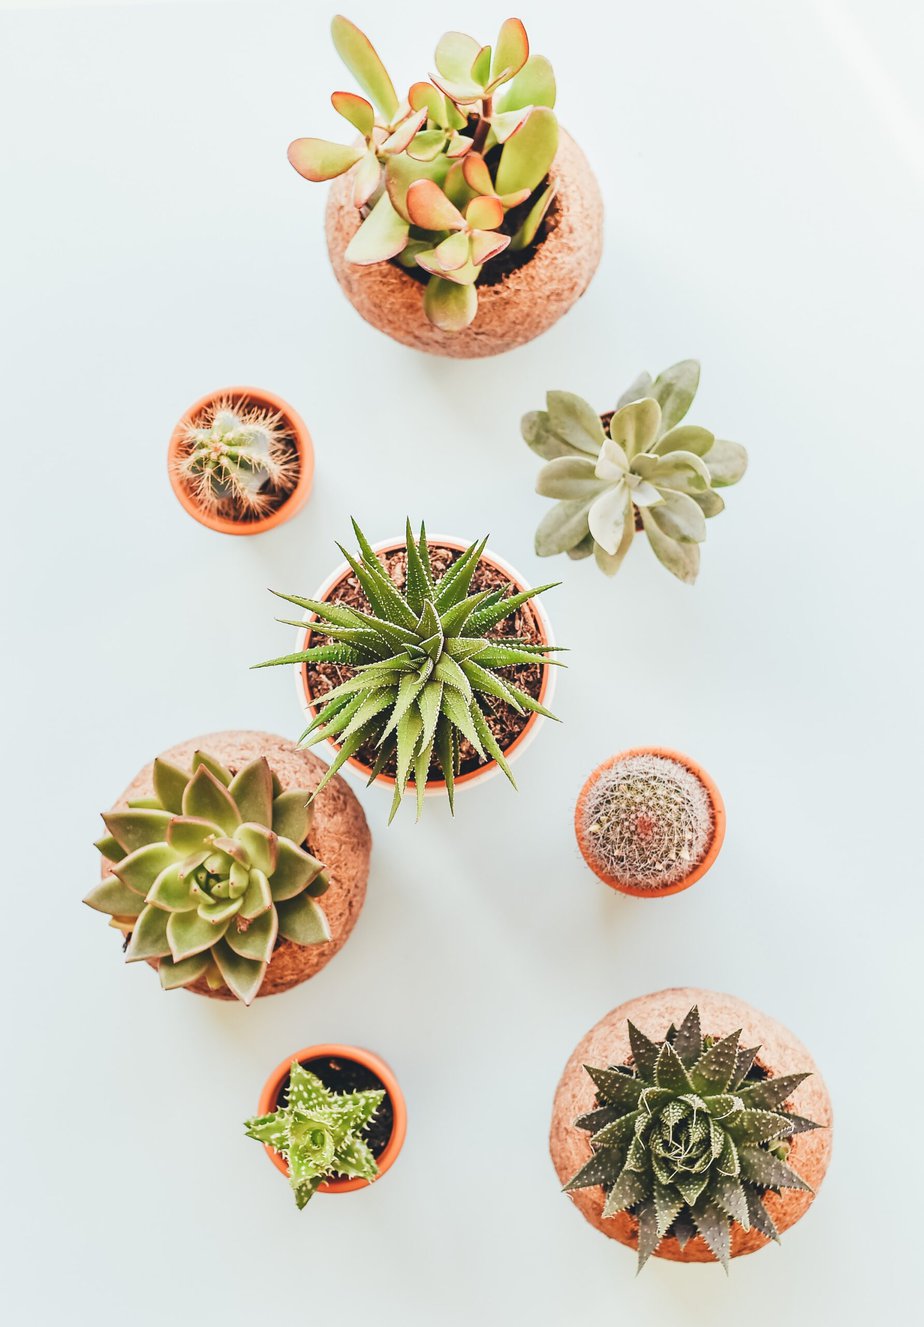 Succulent 101 – Dormancy and Everything Else You Need to Know